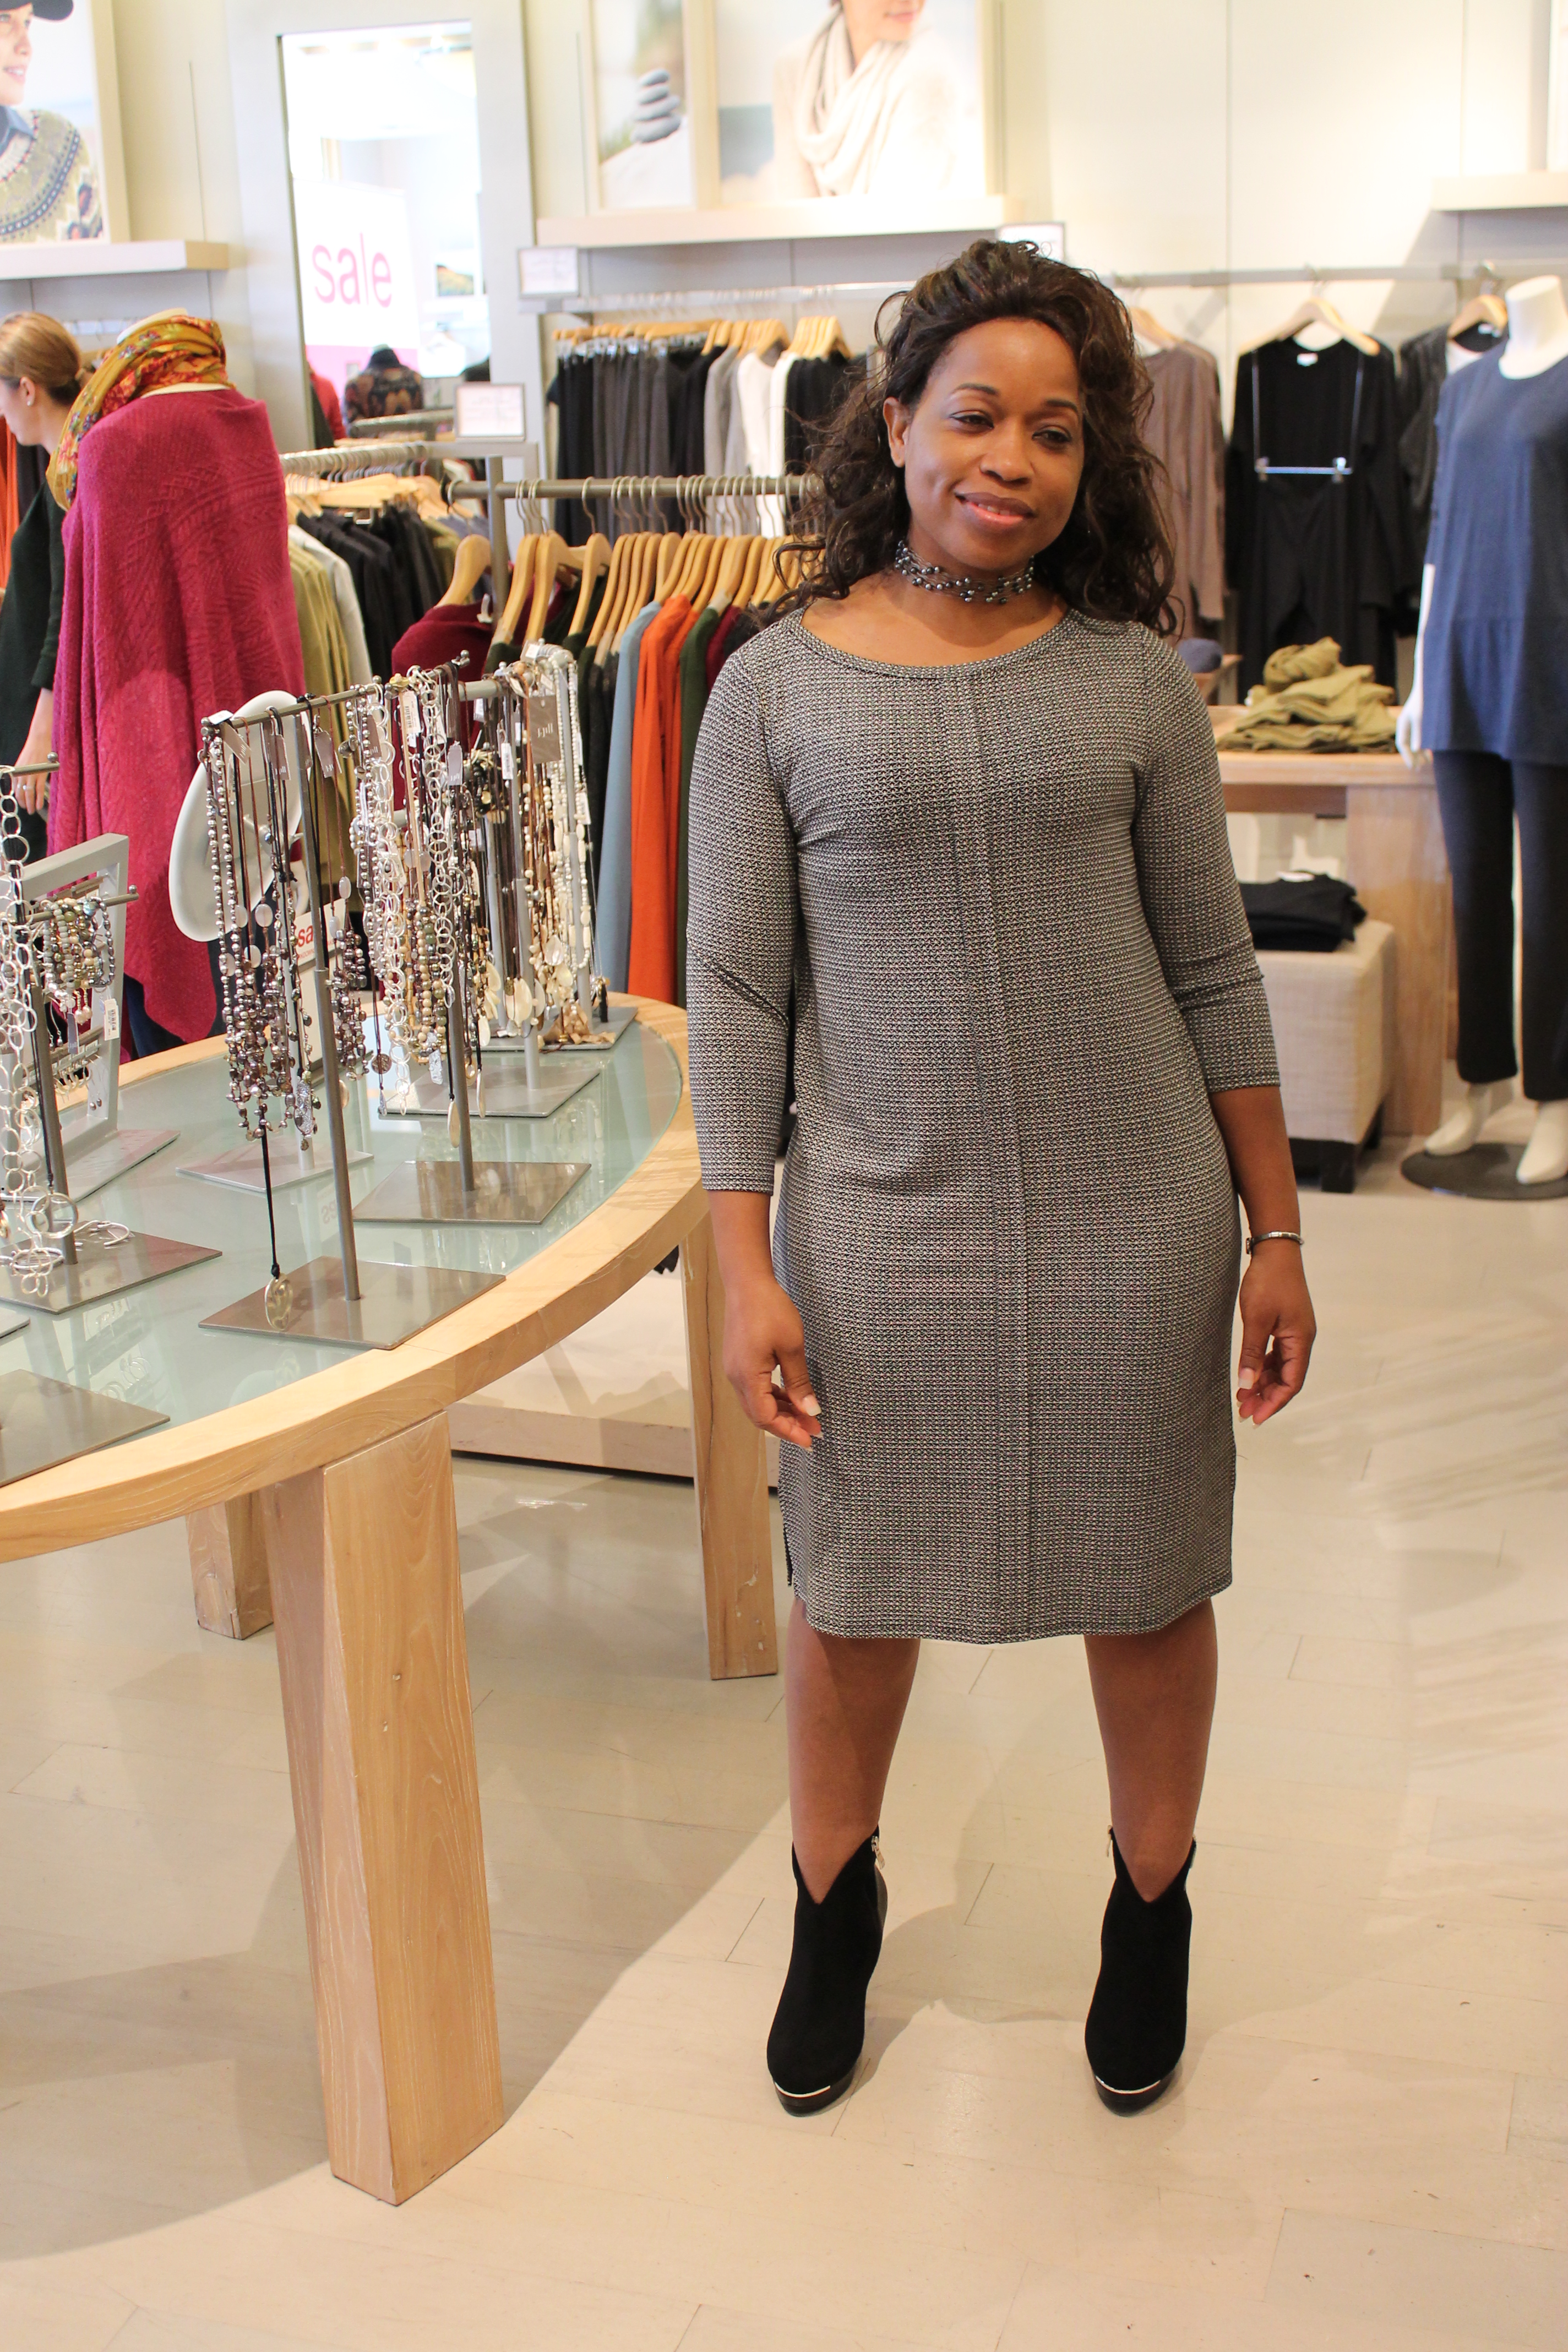 The J. Jill Styling Party Was A Blast, Checkout Our Recap Of The Event -  Stylish Curves